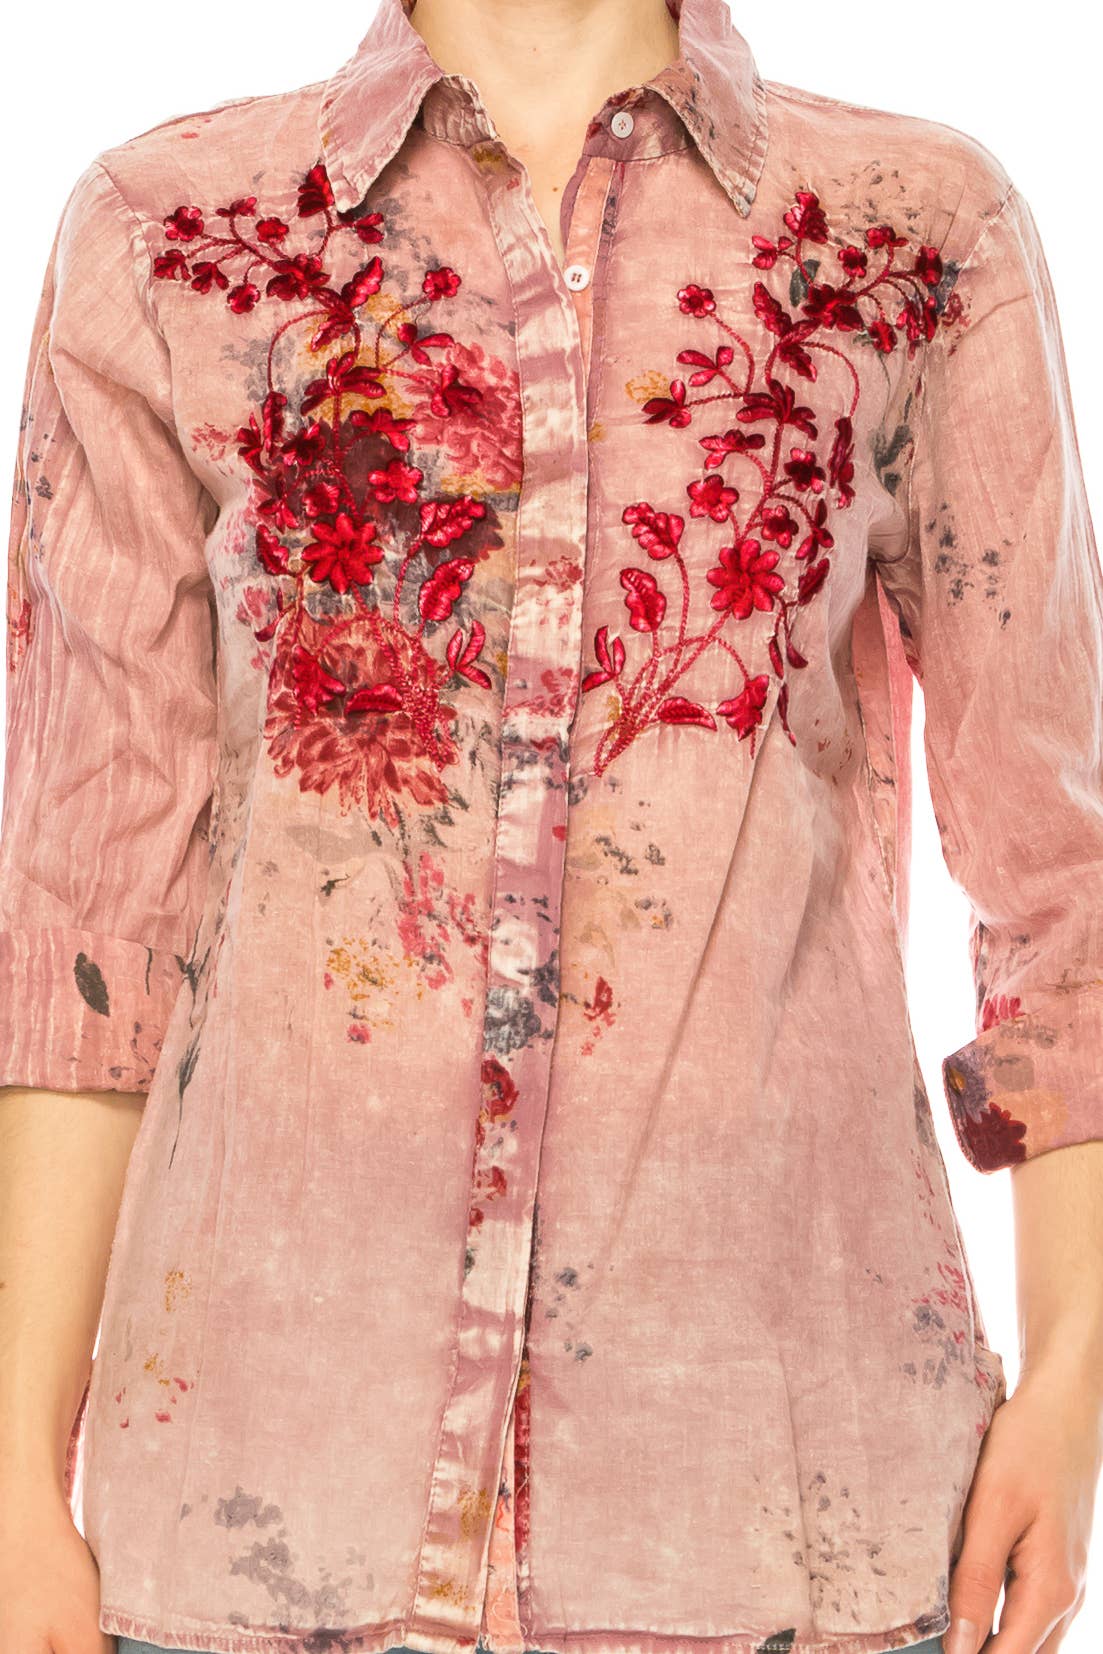 Magazine Clothing - Vintage Pink Floral Printed Shirt with Embroidery: Large